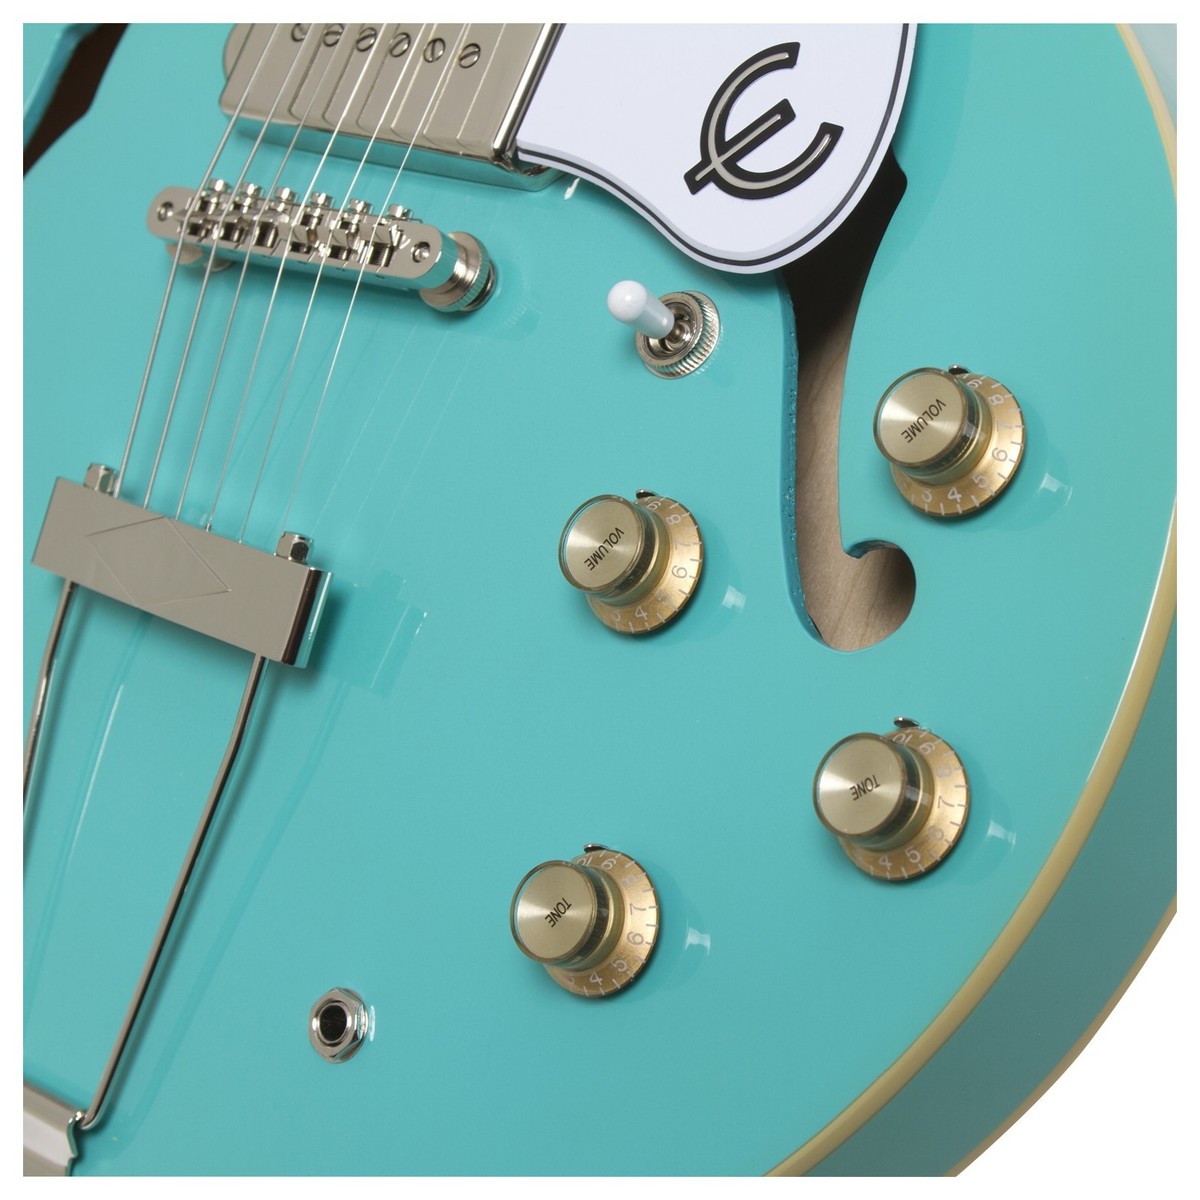 Epiphone Casino Coupe Archtop 2019 2p90 Ht Pf - Turquoise - Semi-hollow electric guitar - Variation 1